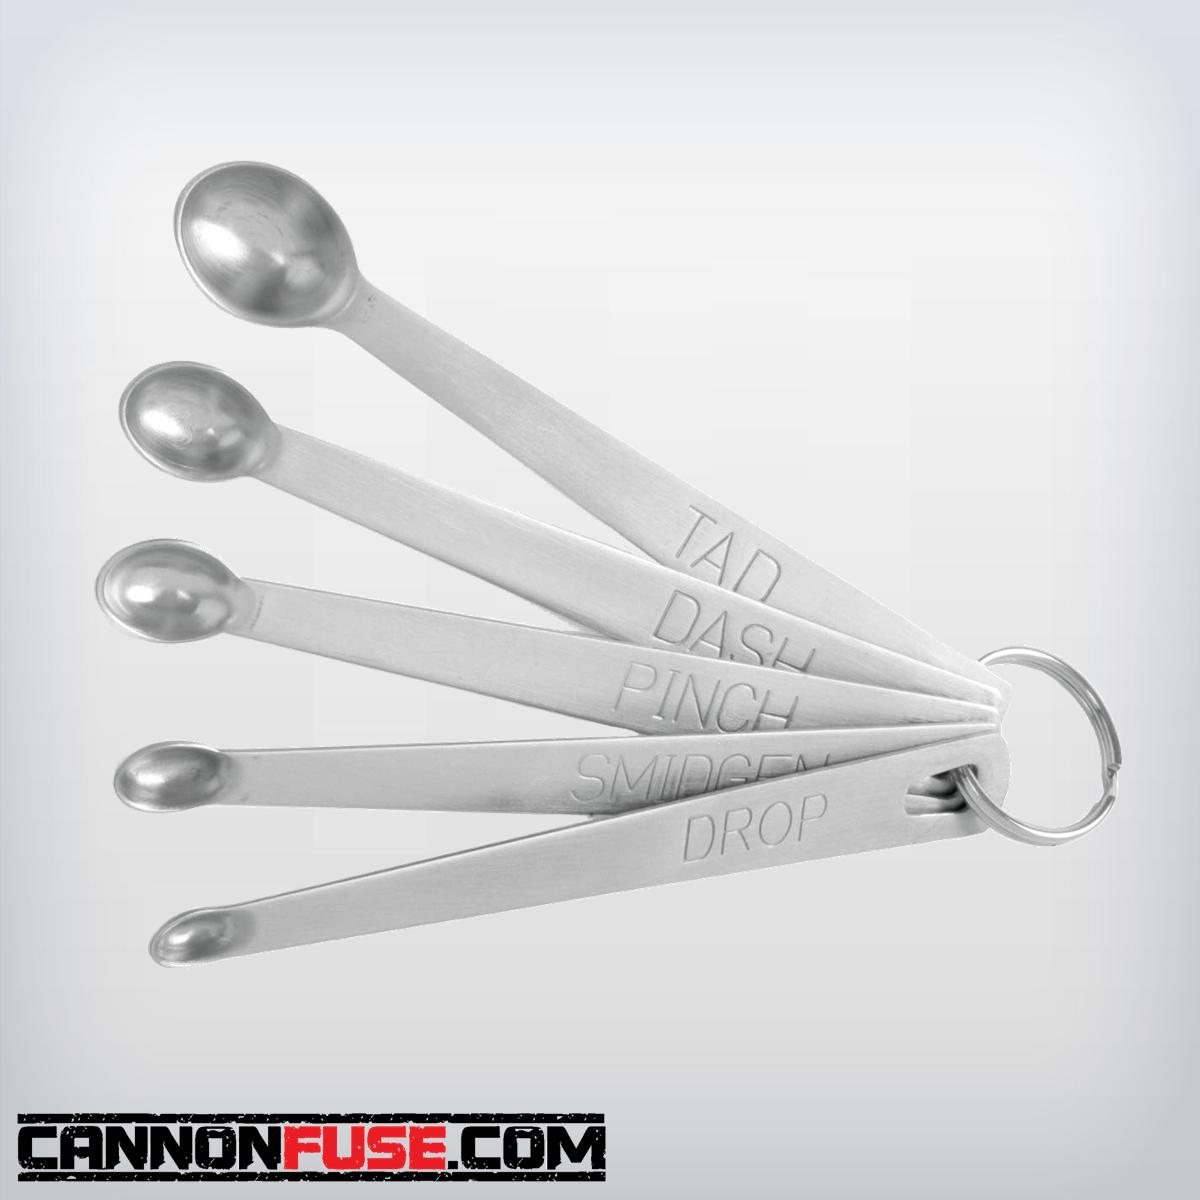 https://cannonfuse.com/images/product/small_measuring_spoons.jpg